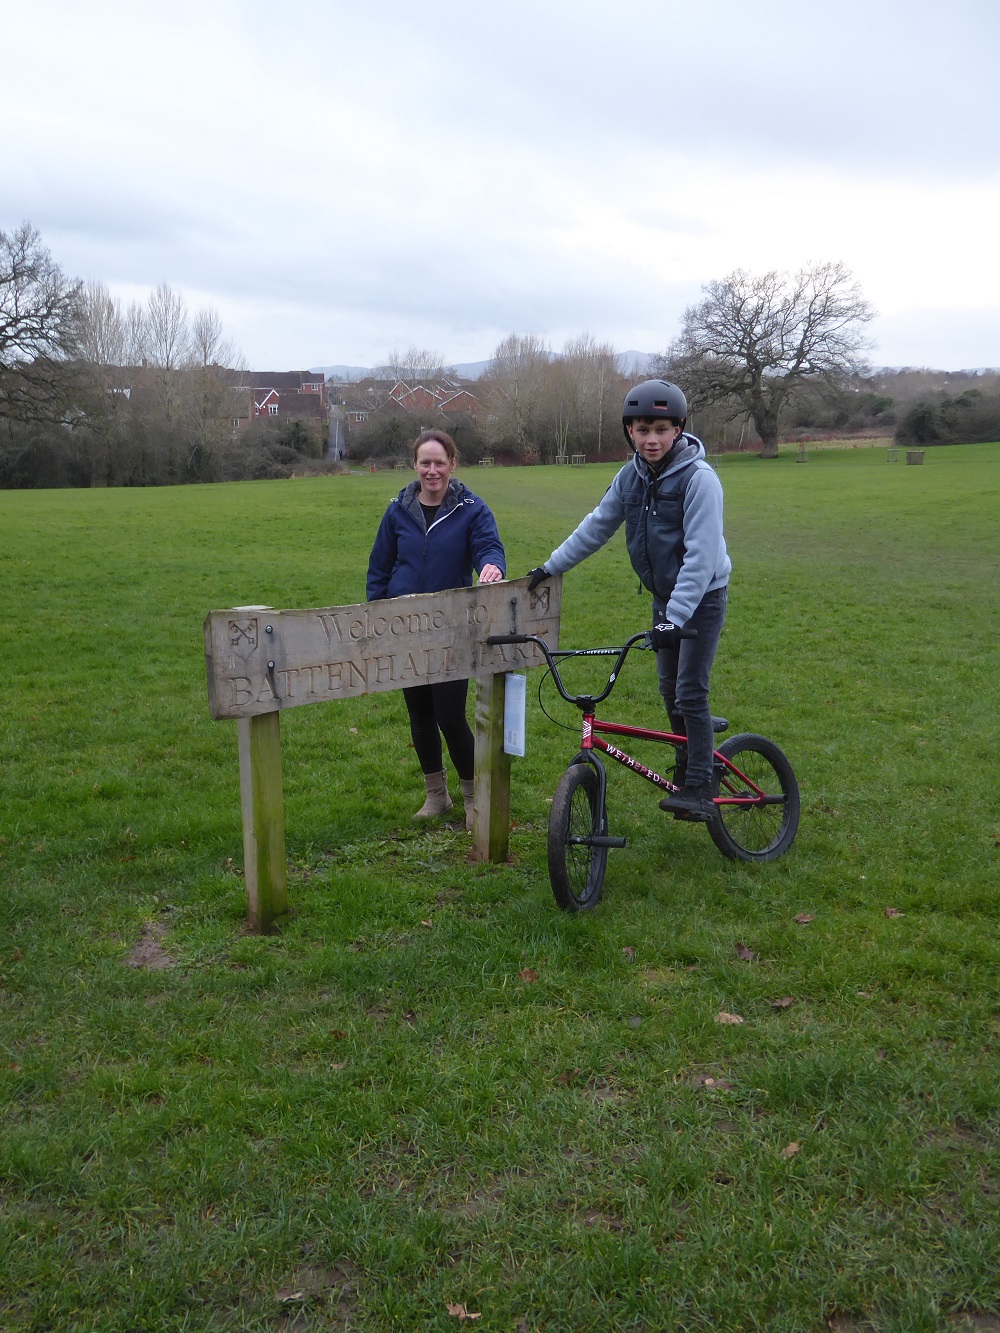 Tom's delight as committee backs £60,000 pump track